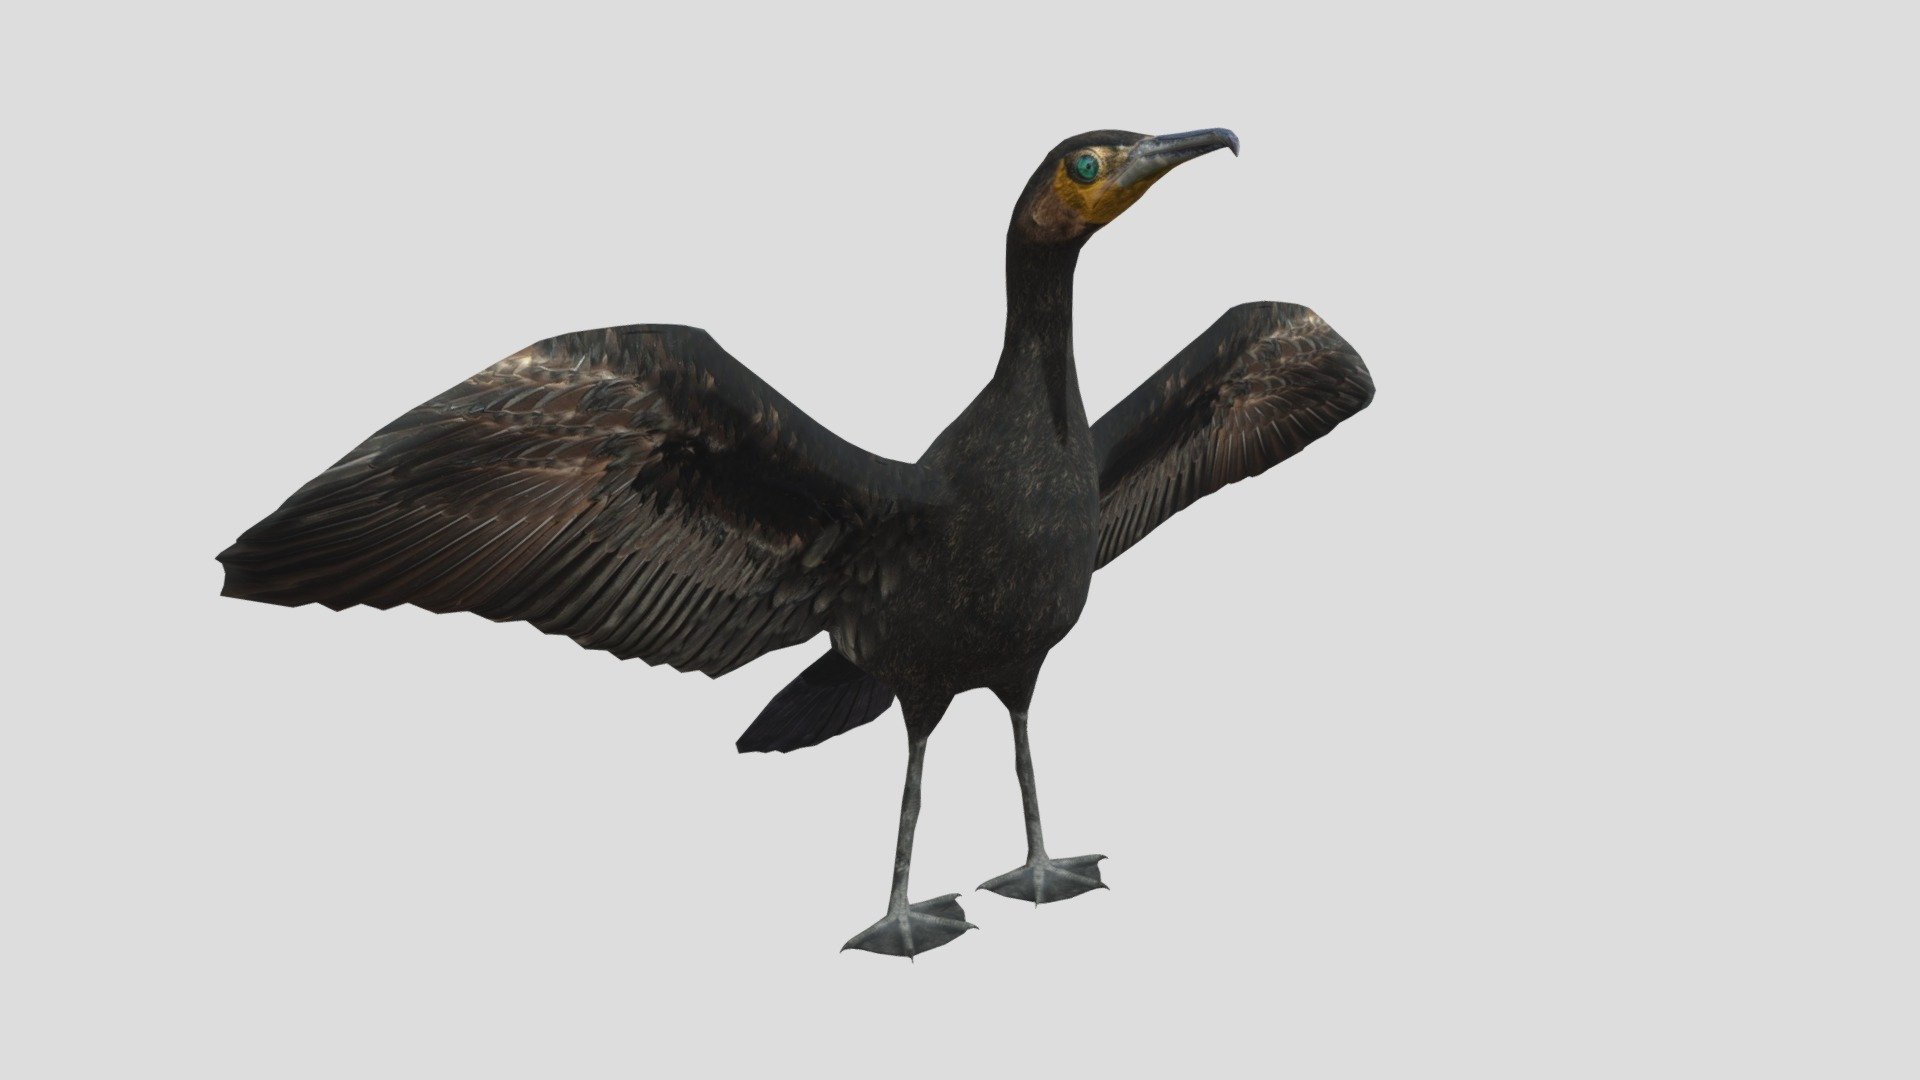 The great cormorant (Phalacrocorax carbo), known as the great black cormorant across the Northern Hemisphere, the black cormorant in Australia, the large cormorant in India and the black shag further south in New Zealand, is a widespread member of the cormorant family of seabirds.

Low polygon 3d model.
Textures color,normal  and roughness maps JPEG.
Textures size 4096x4096 pxls 3d model